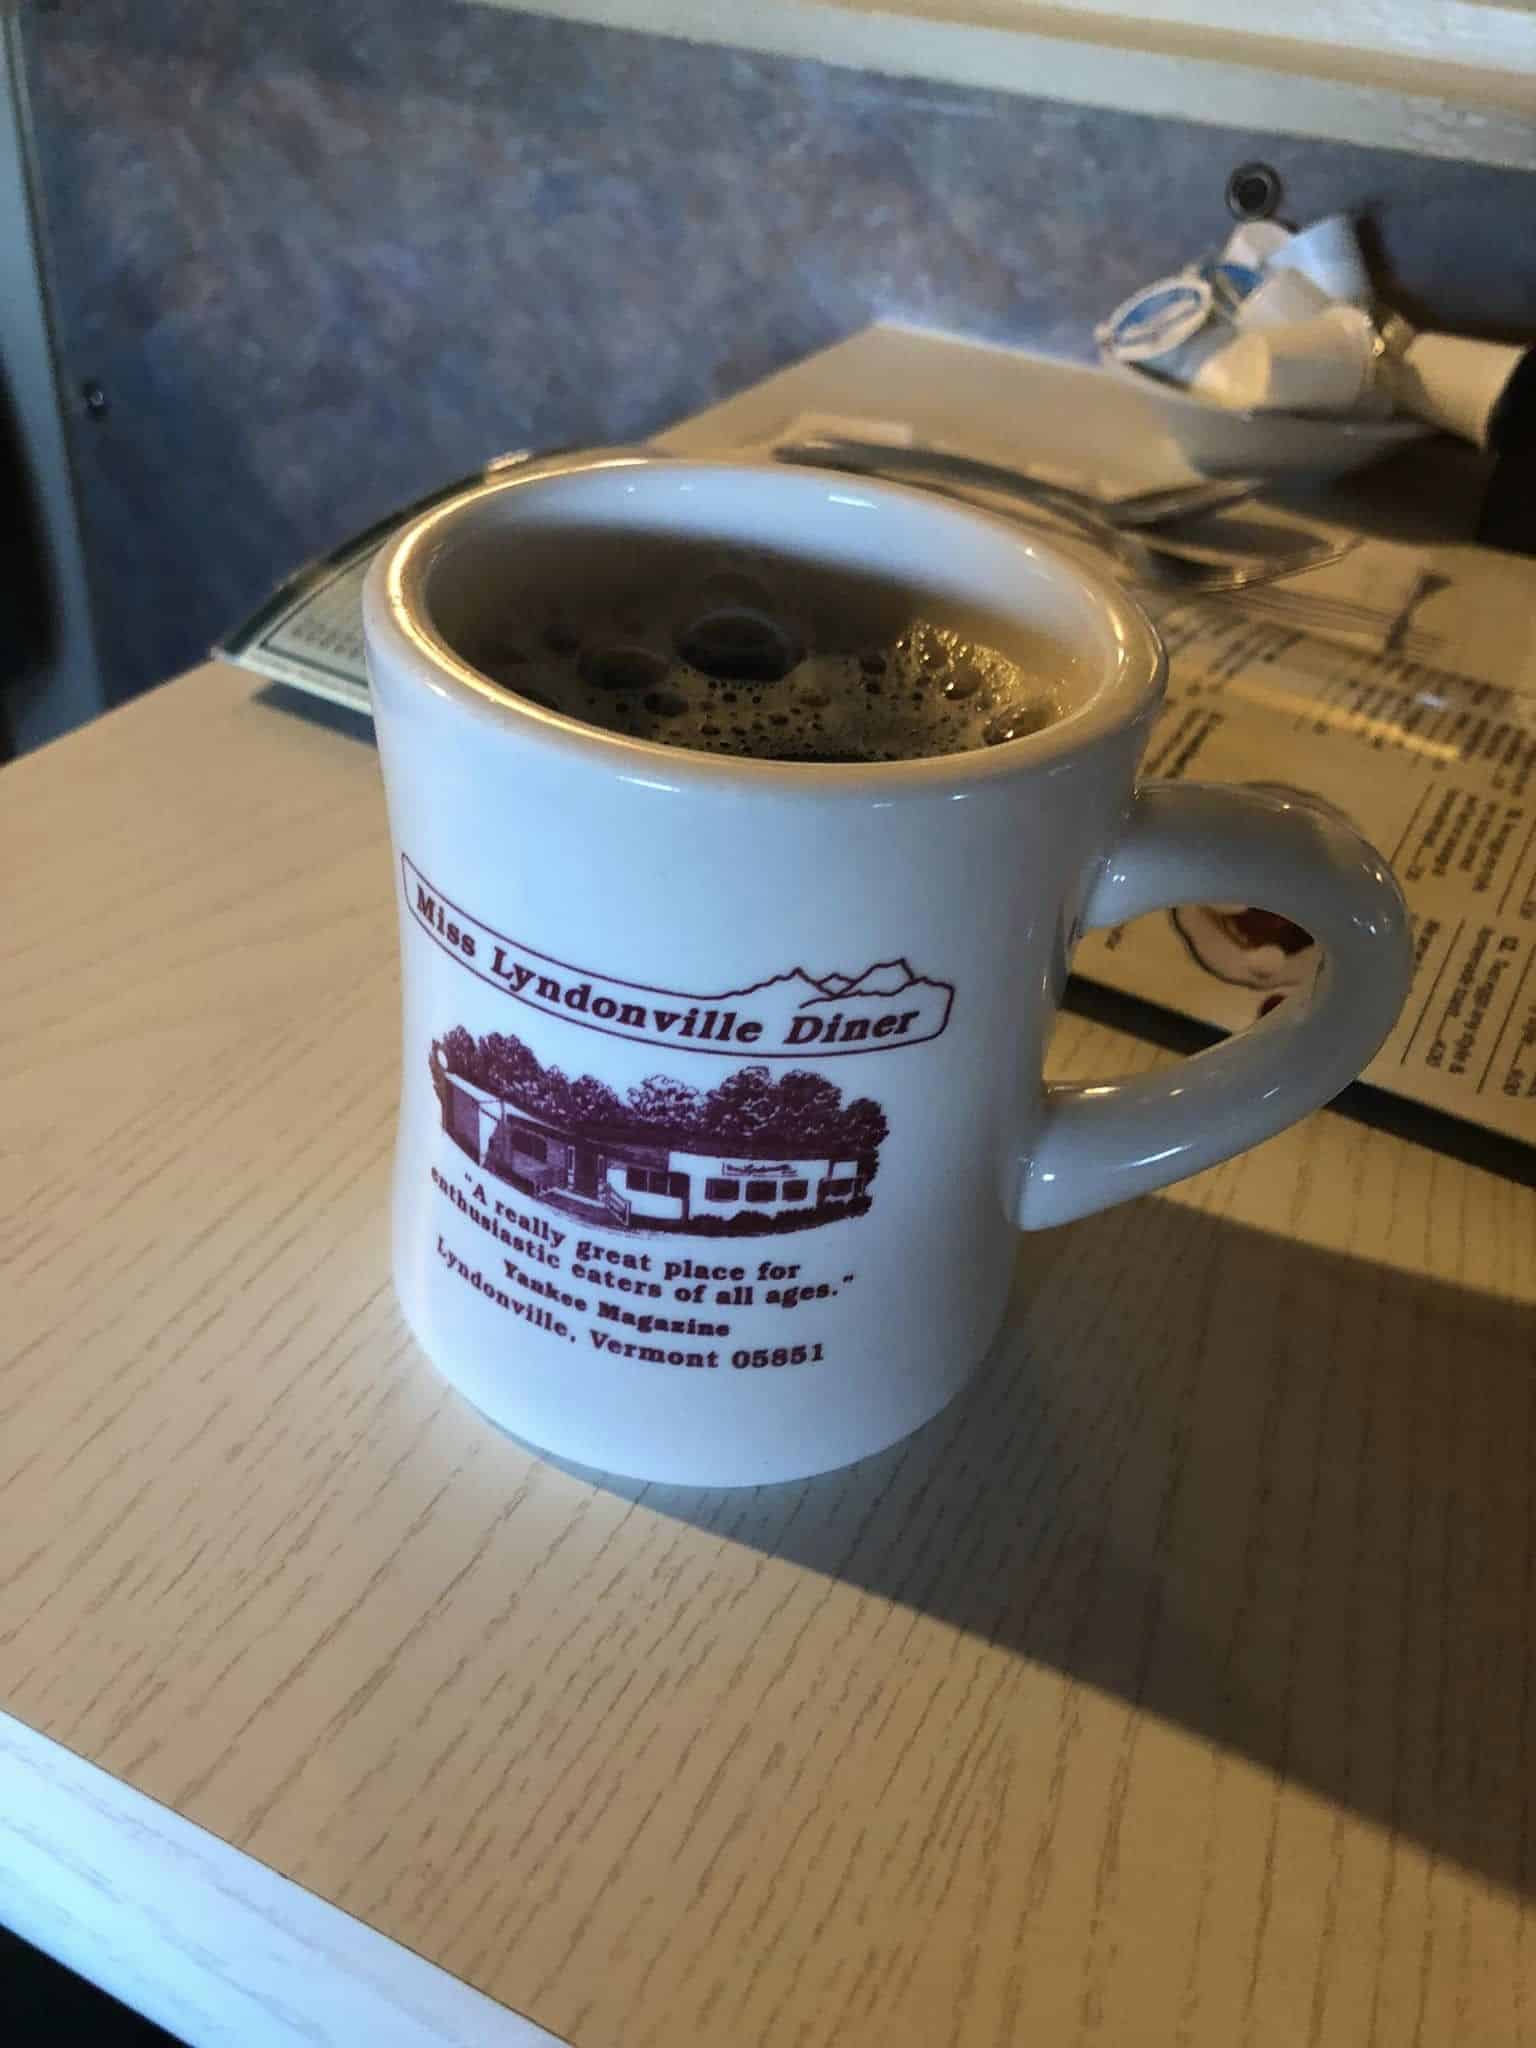 Miss Lyndonville Diner - Coffee